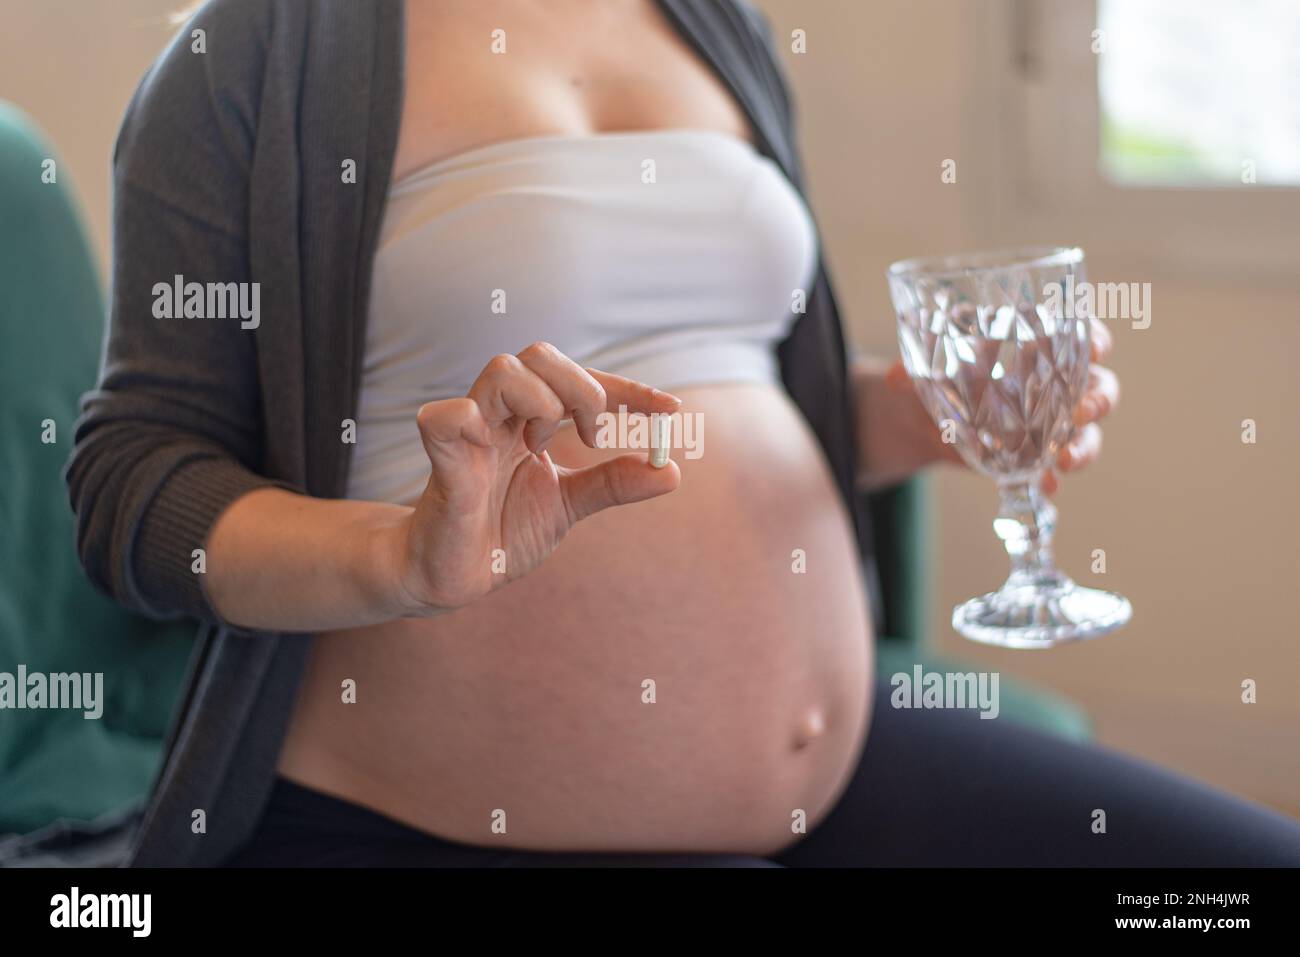 Pregnant woman taking compounded capsule Stock Photo